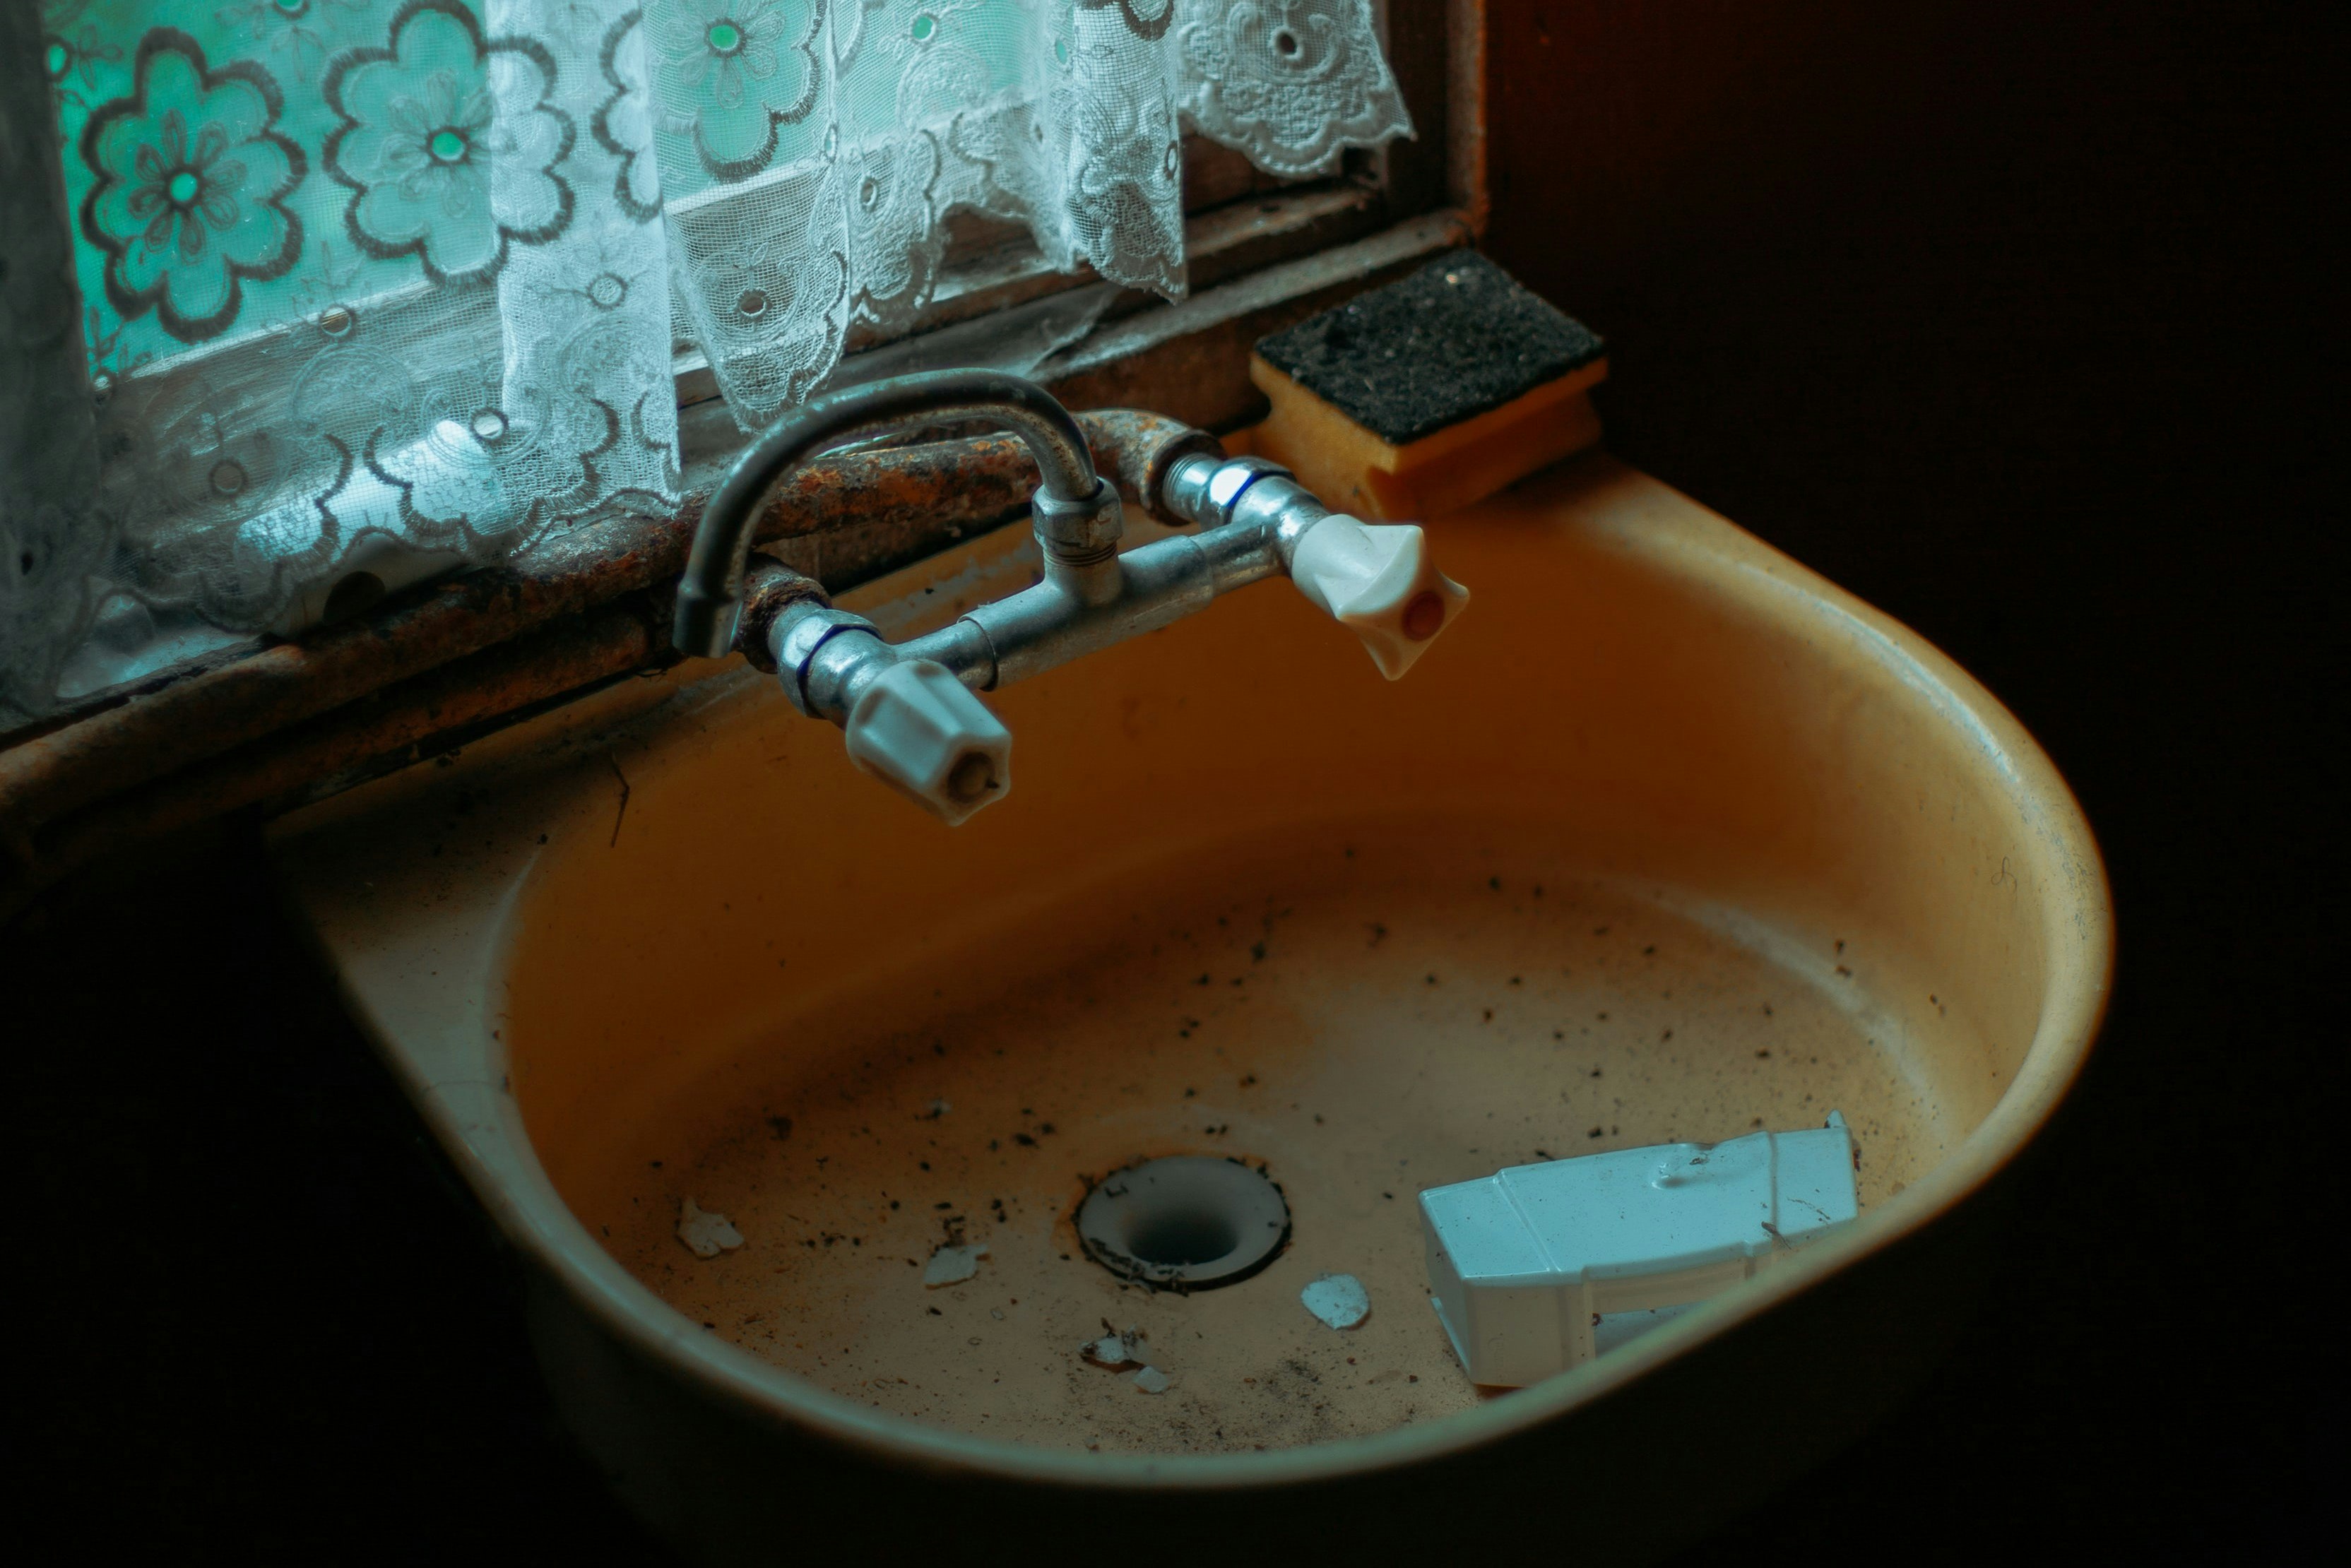 An old, dirty ceramic sink